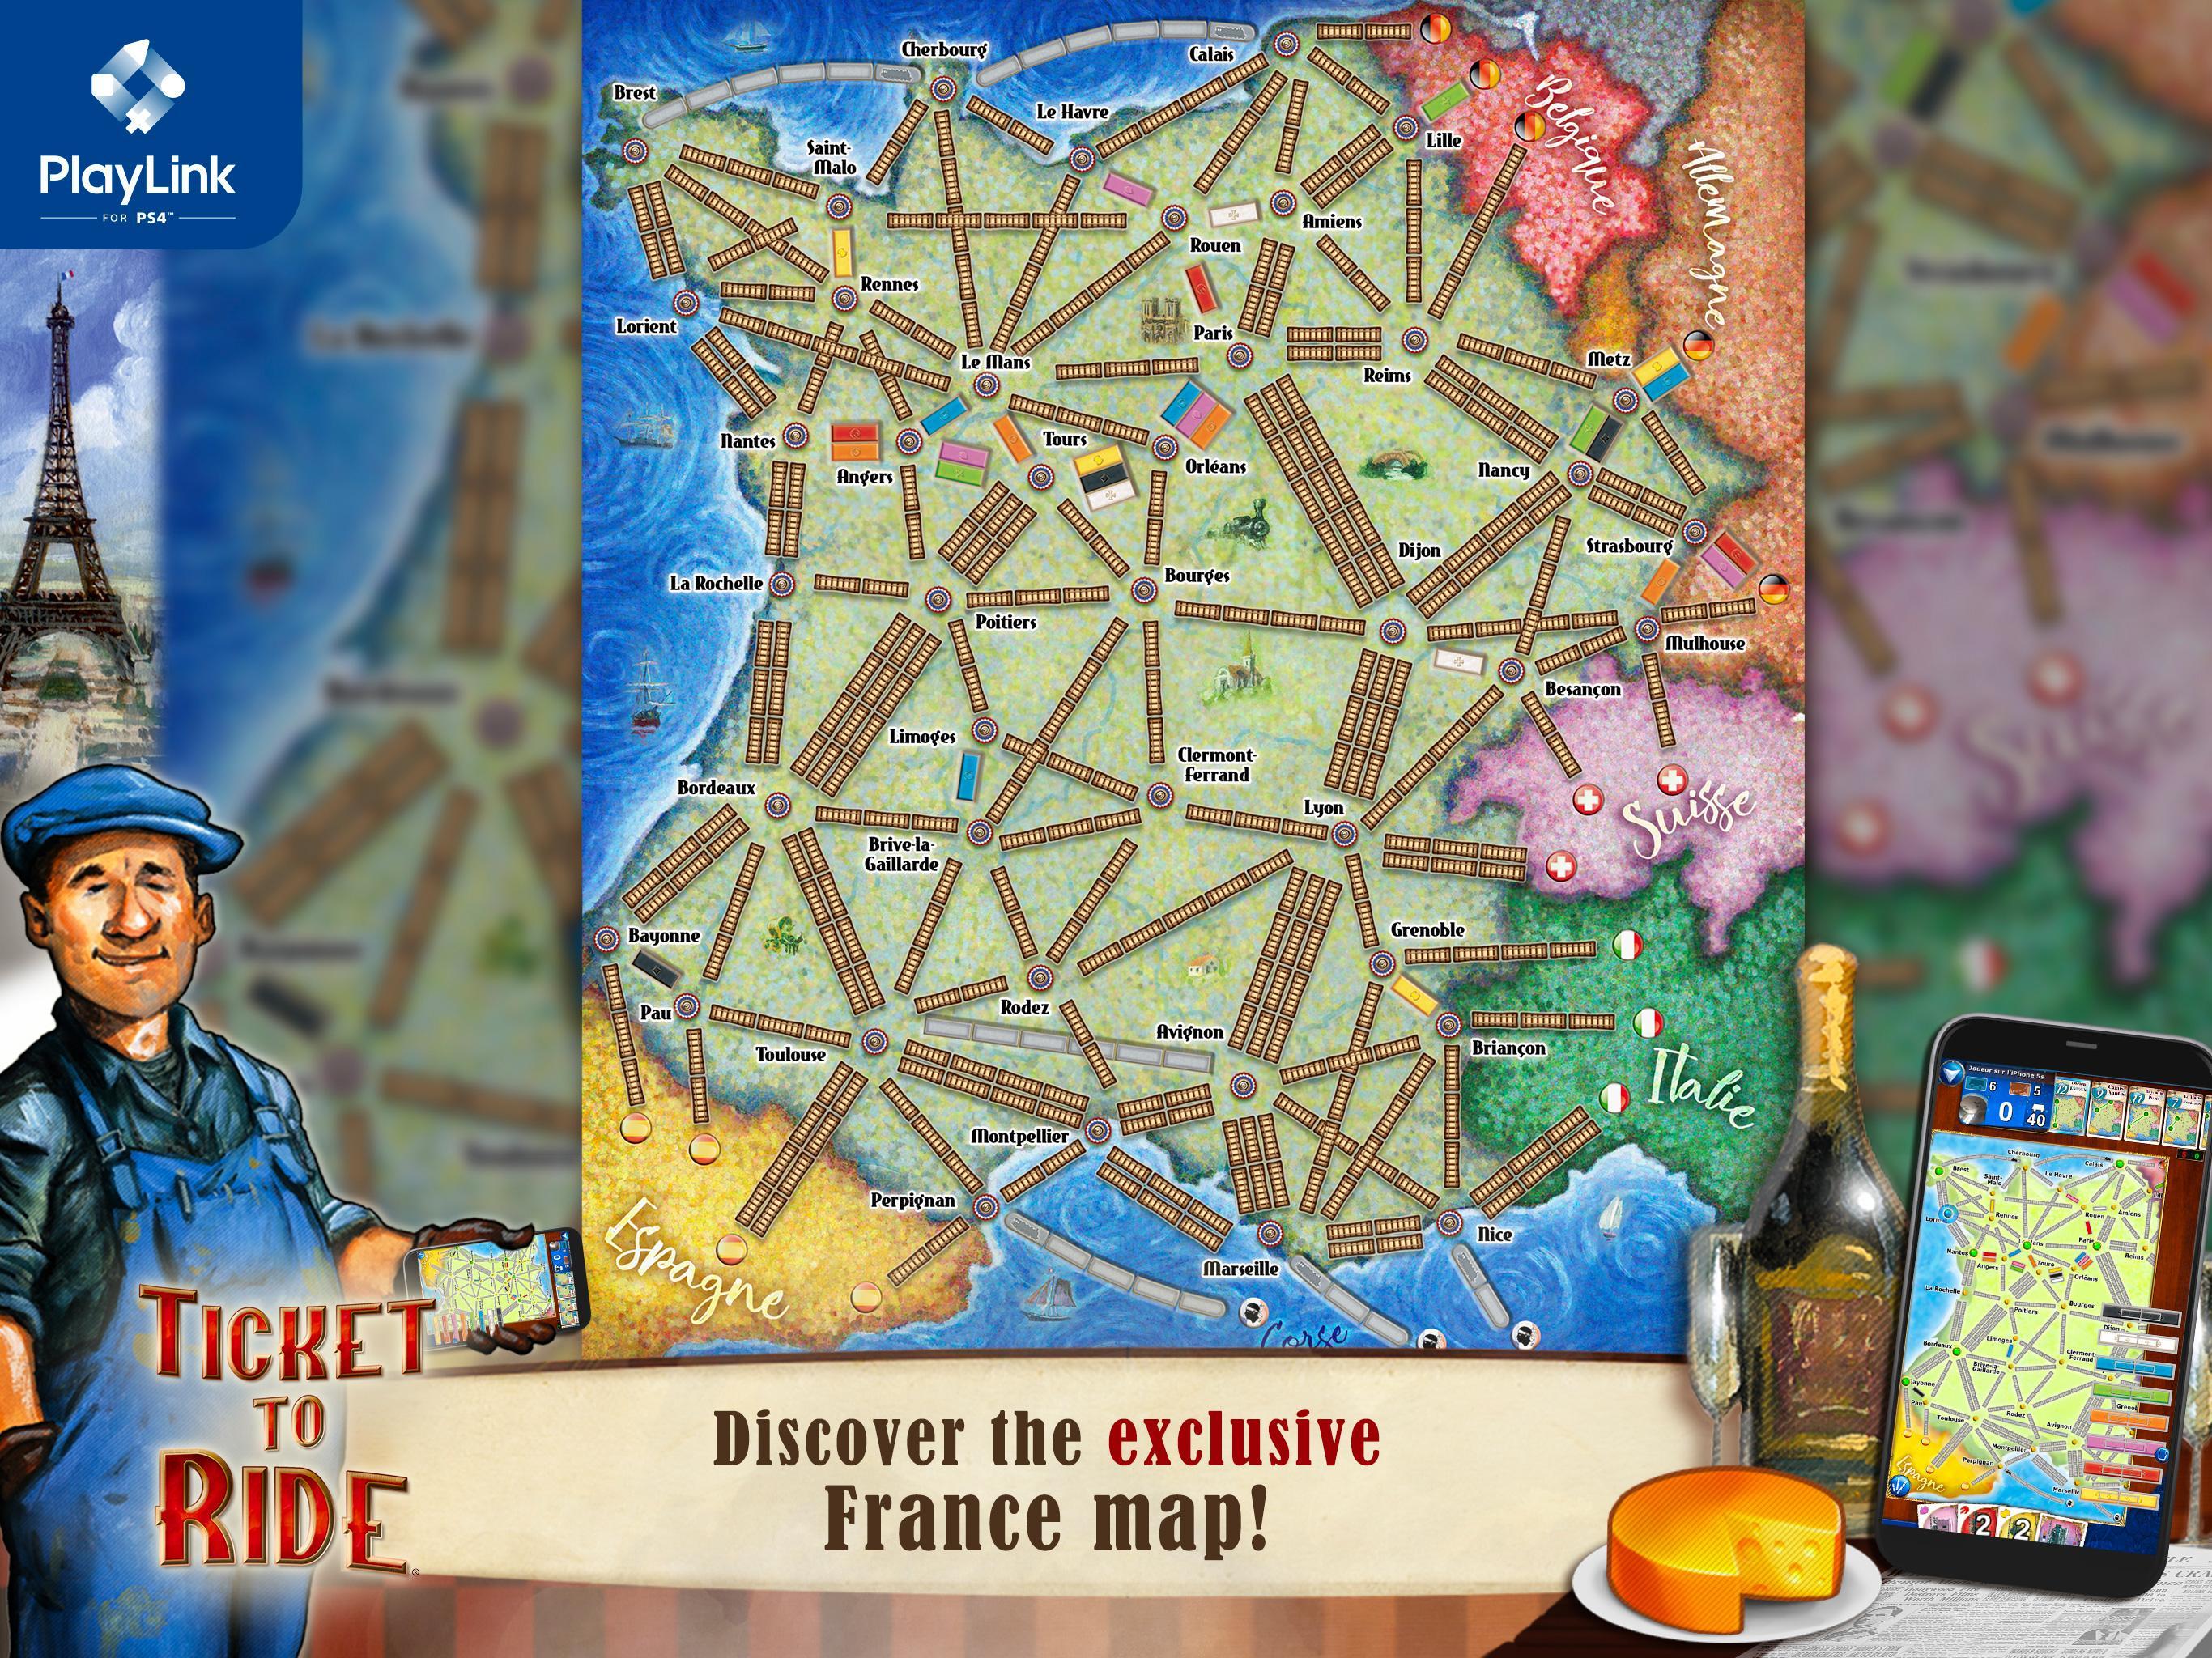 Ticket to Ride for PlayLink 2.7.2-6472-ceb1ea16 Screenshot 10